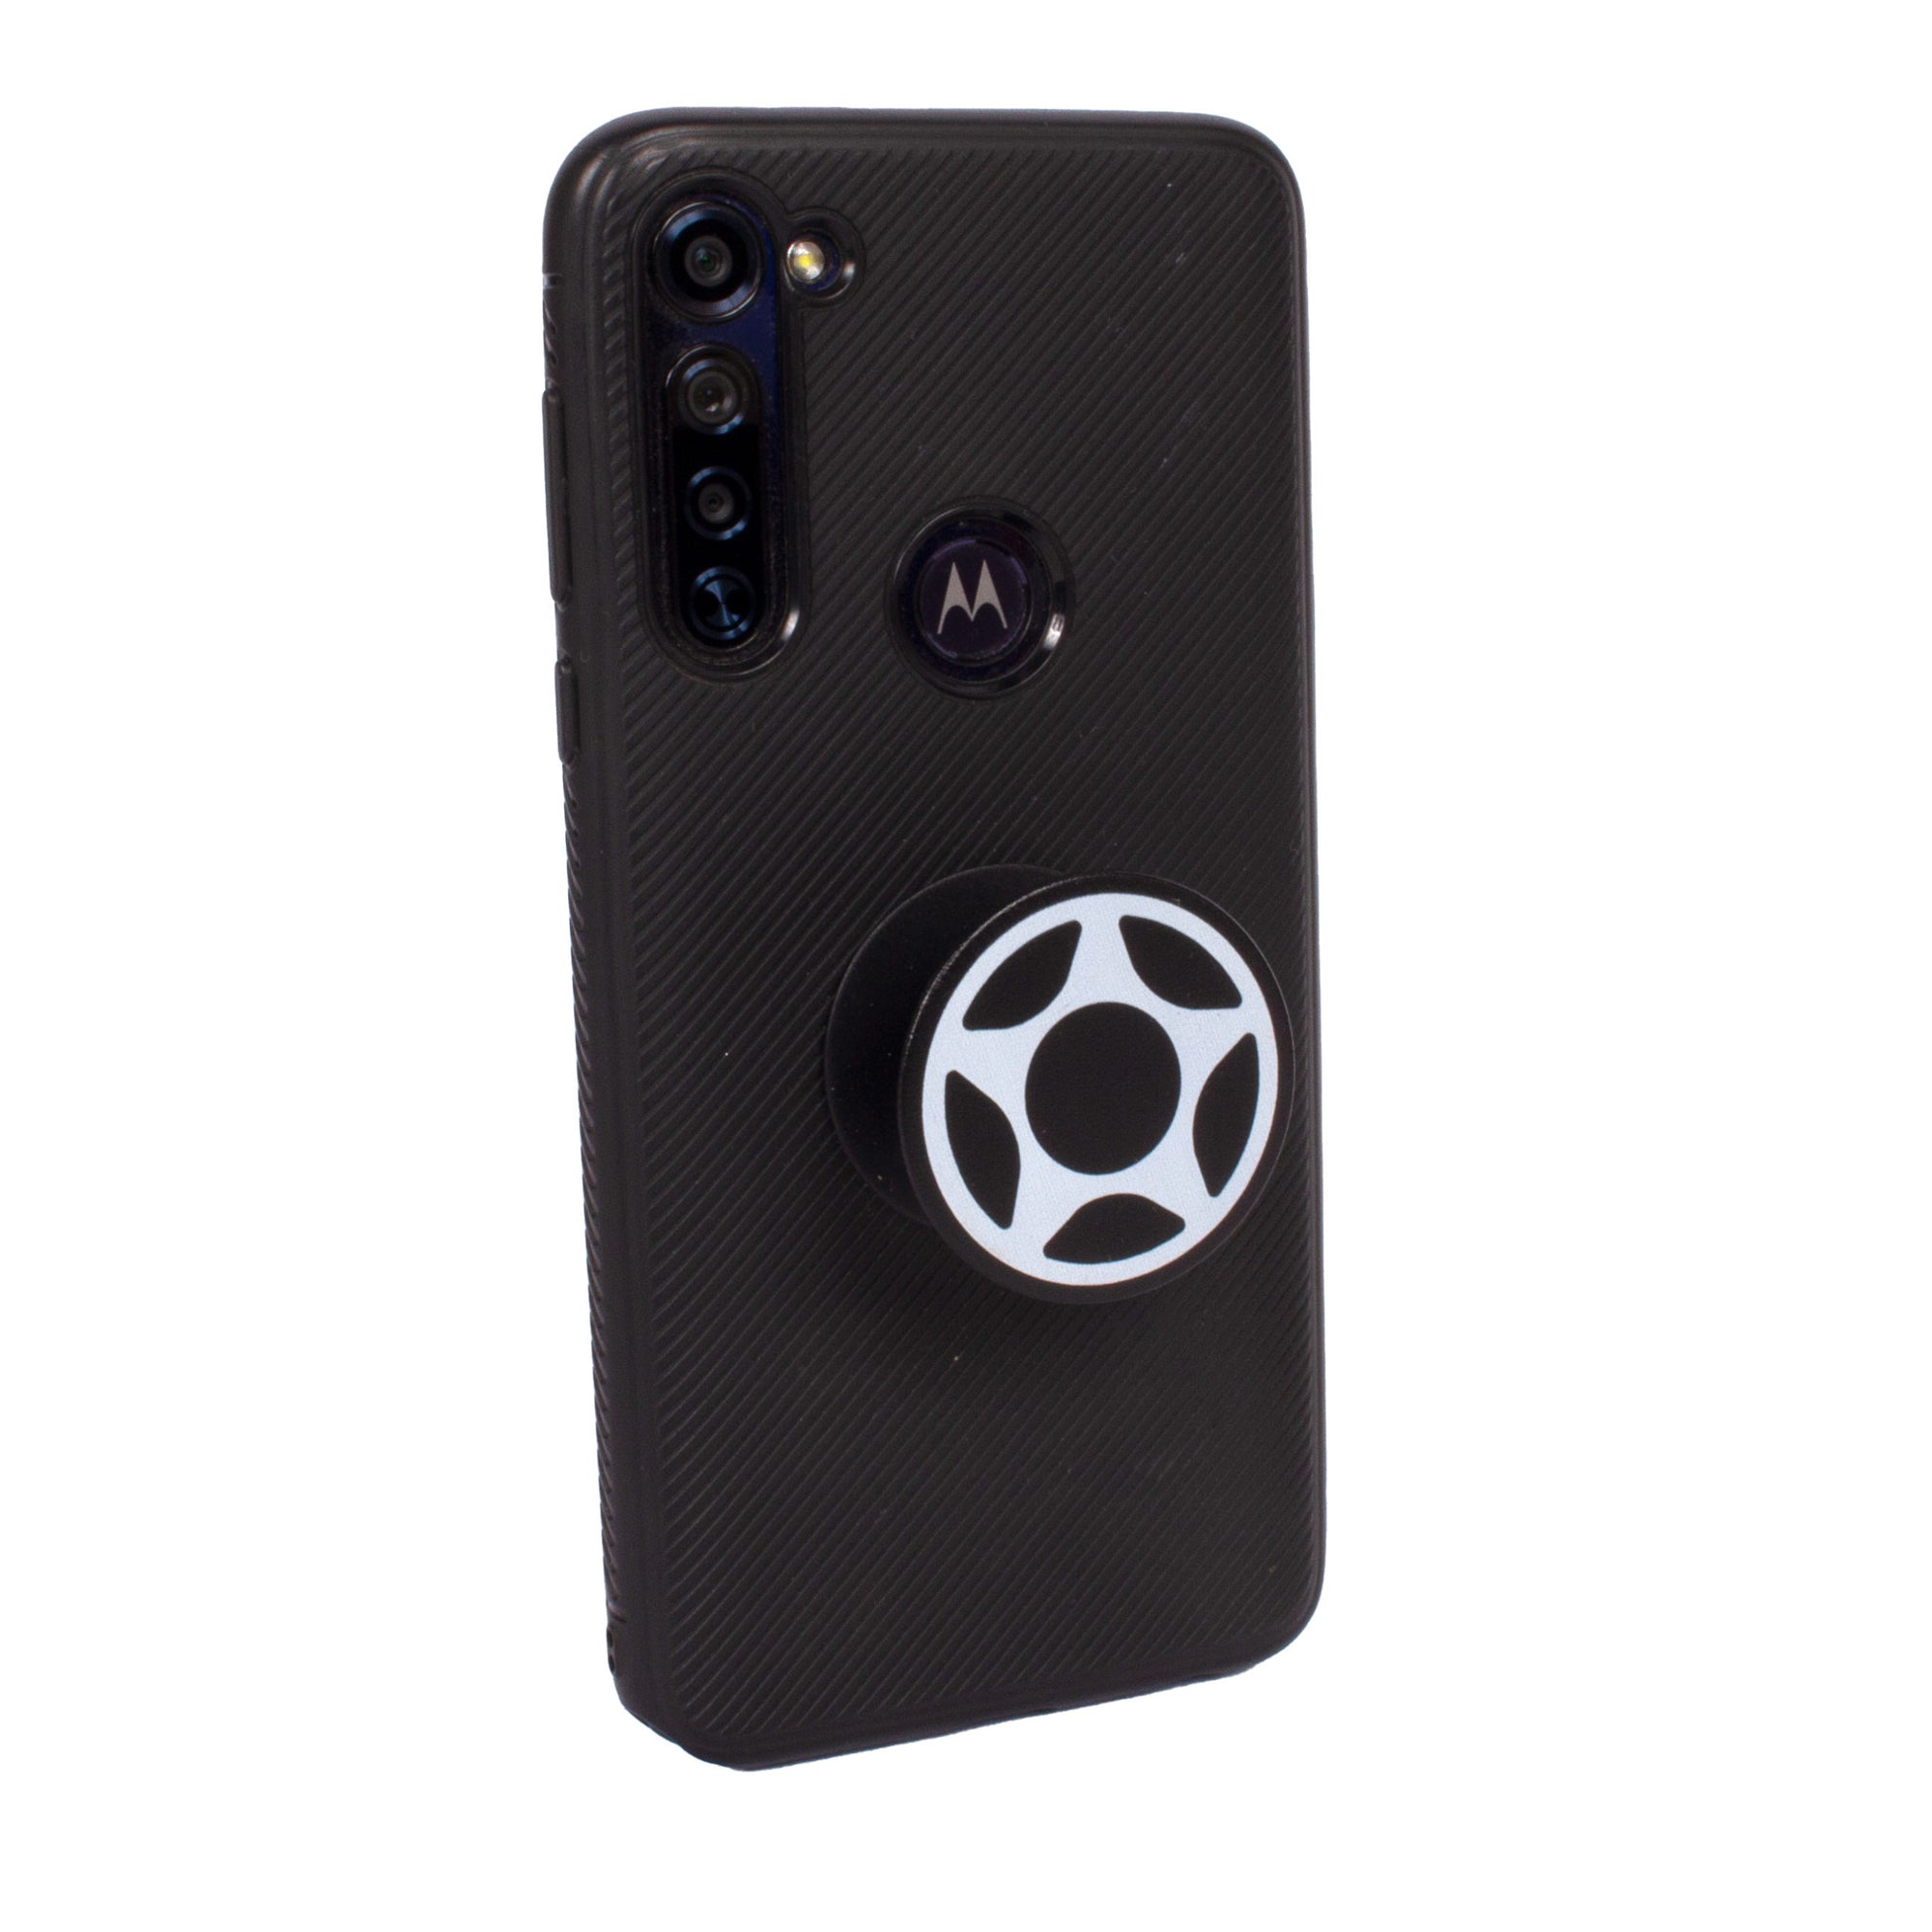 Proto Logo Pop-Out Phone Holder